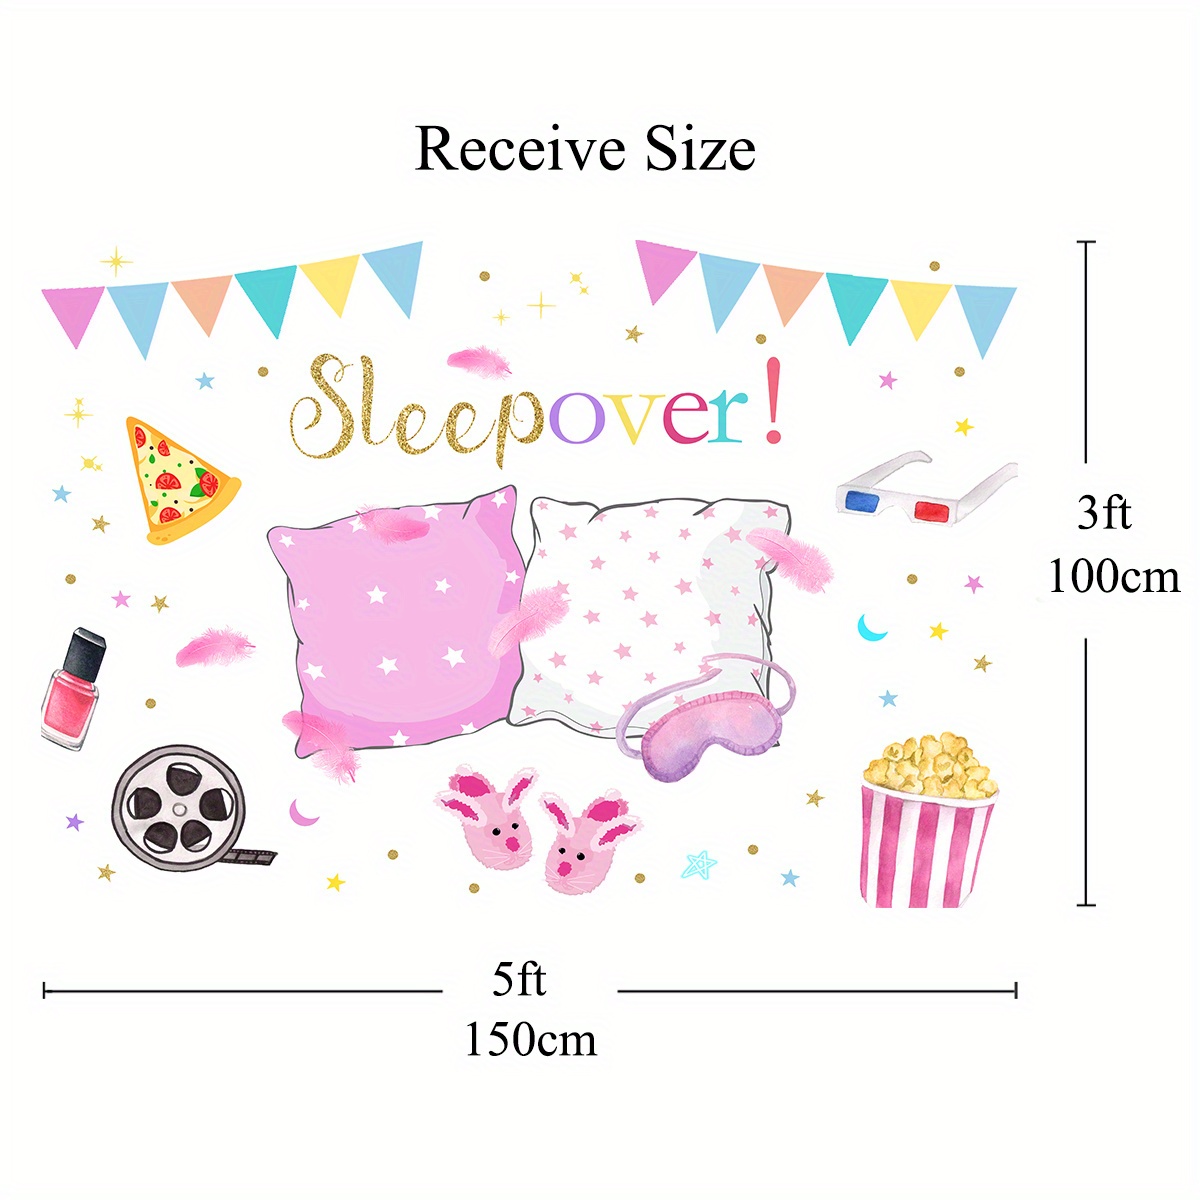 Sleepover Party Backdrop for Girls, Party Decor, Pajama Slumber Party  Pillow, Fight Teens, Birthday Party Supplies - AliExpress